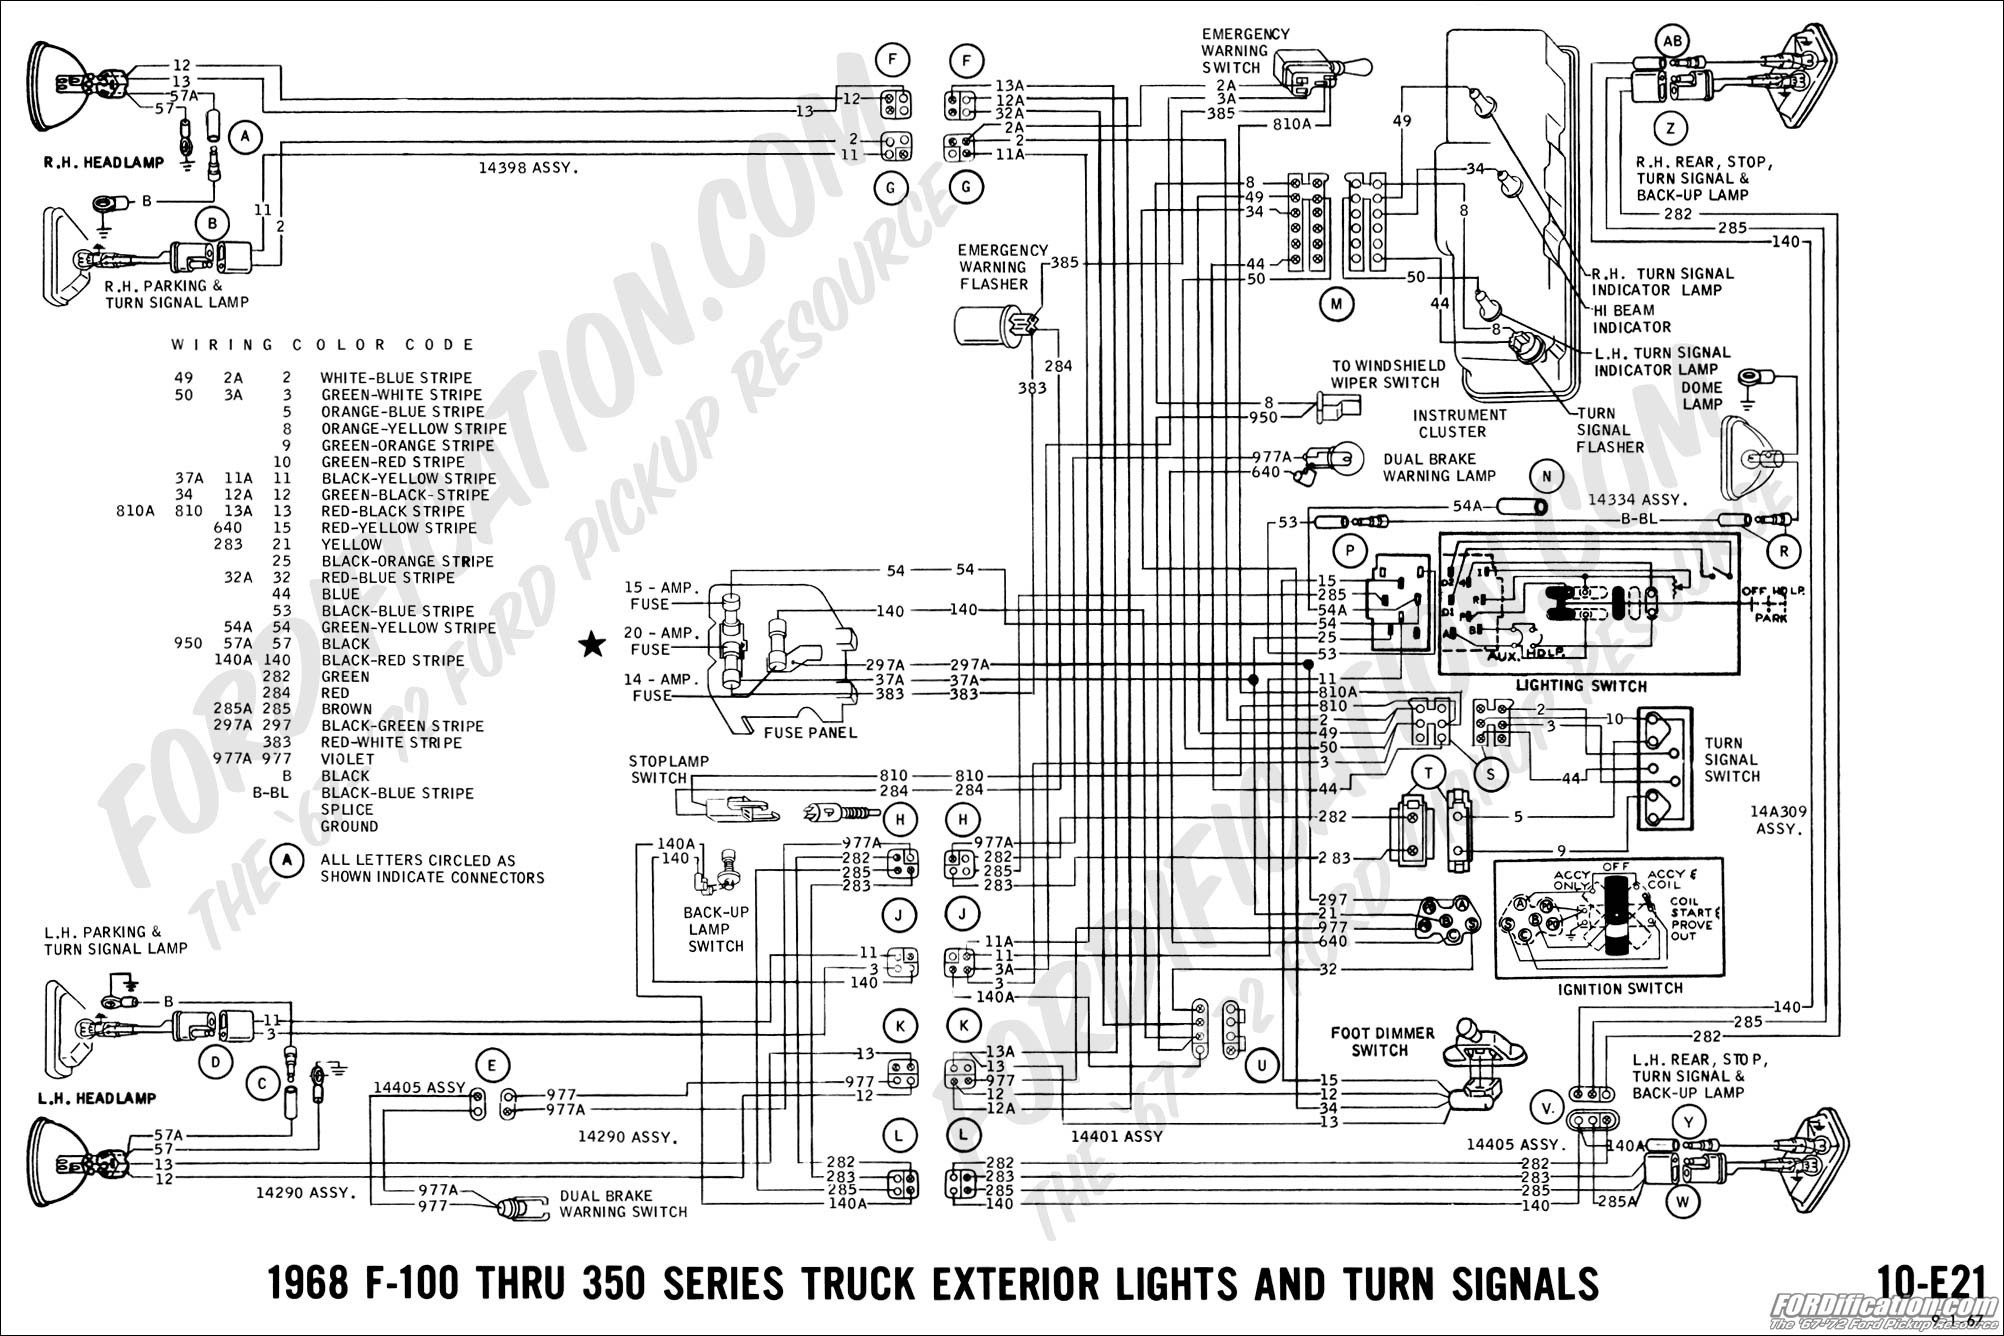 turn signal circuit diagram ford truck technical drawings and schematics section h wiring of turn signal circuit diagram